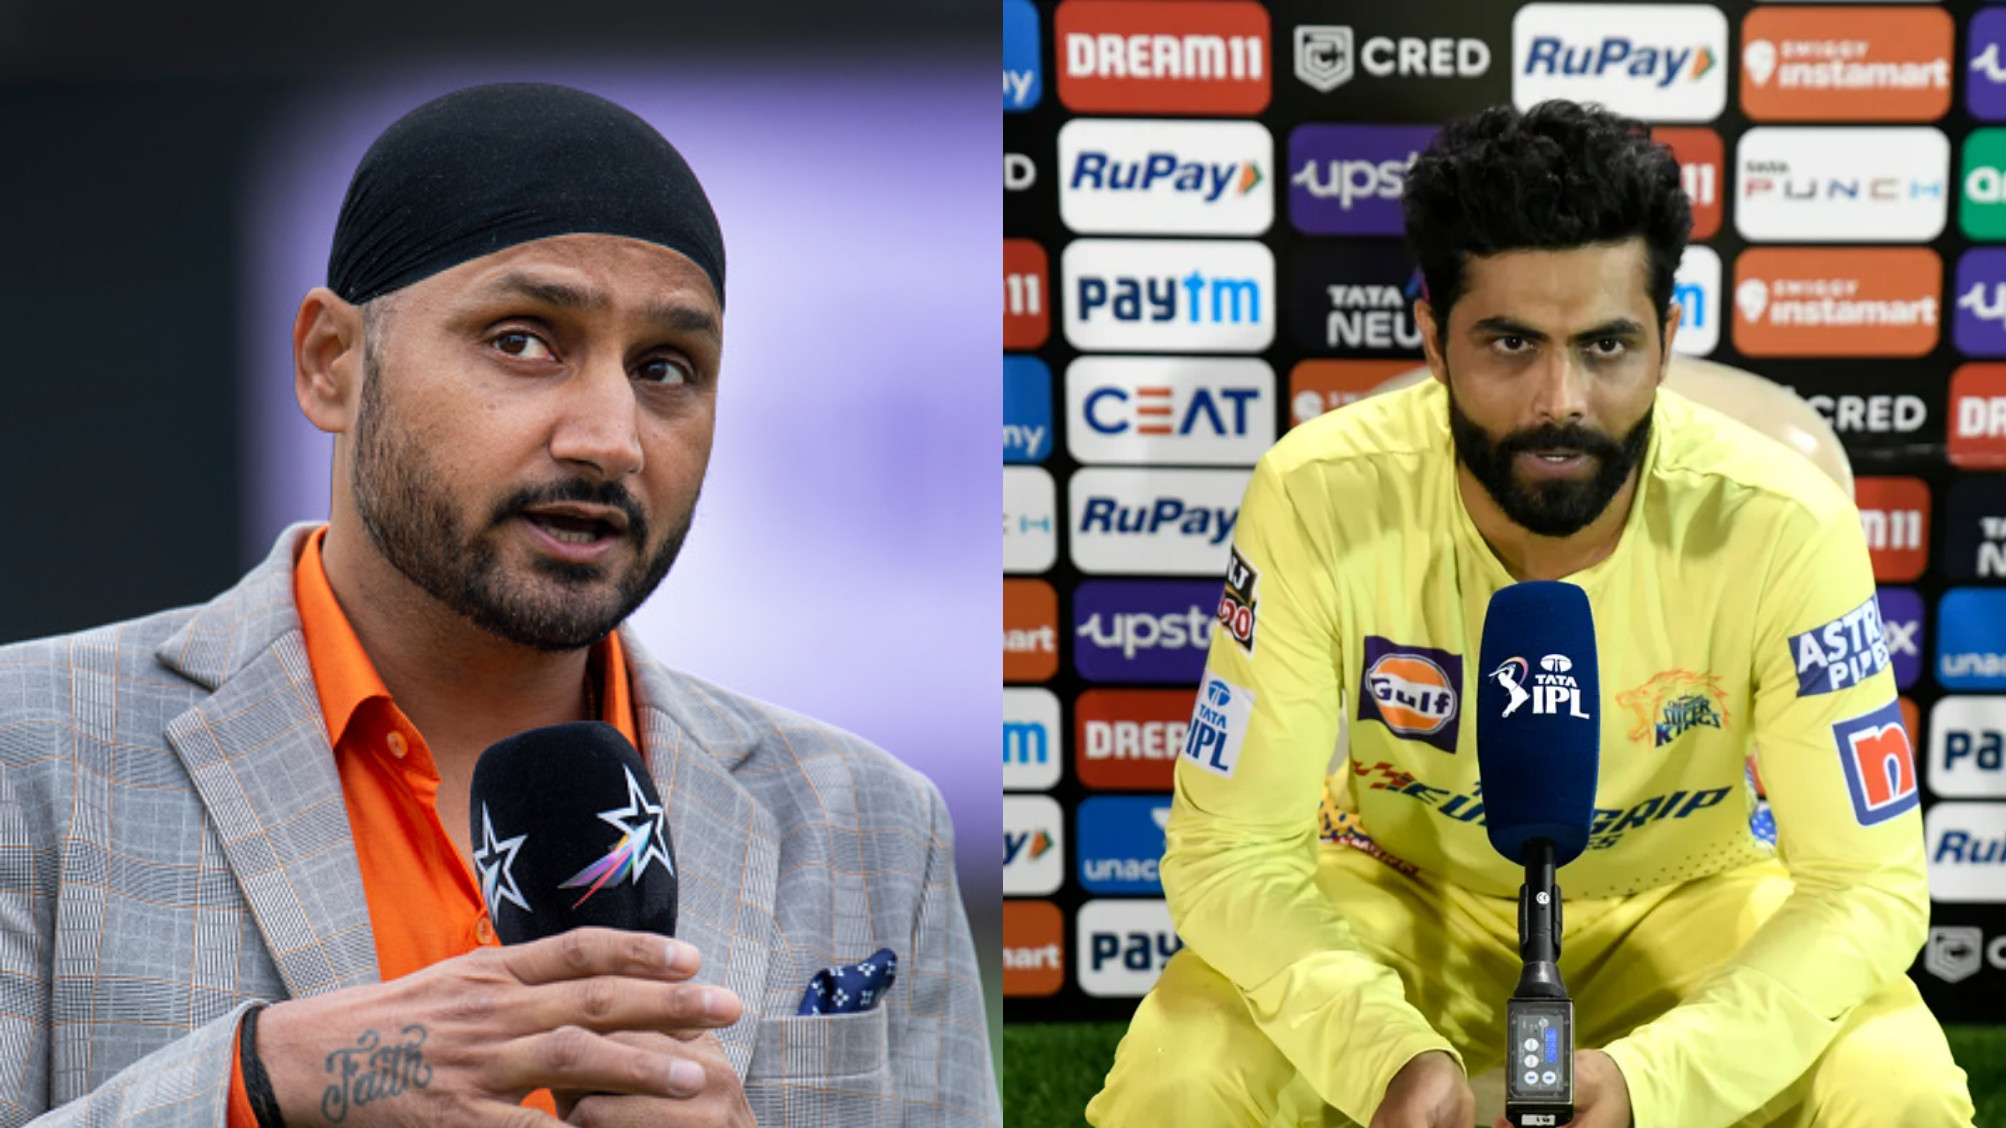 IPL 2022: He’s shedding some of his workload on Dhoni’s shoulders- Harbhajan says CSK captain Jadeja must step up